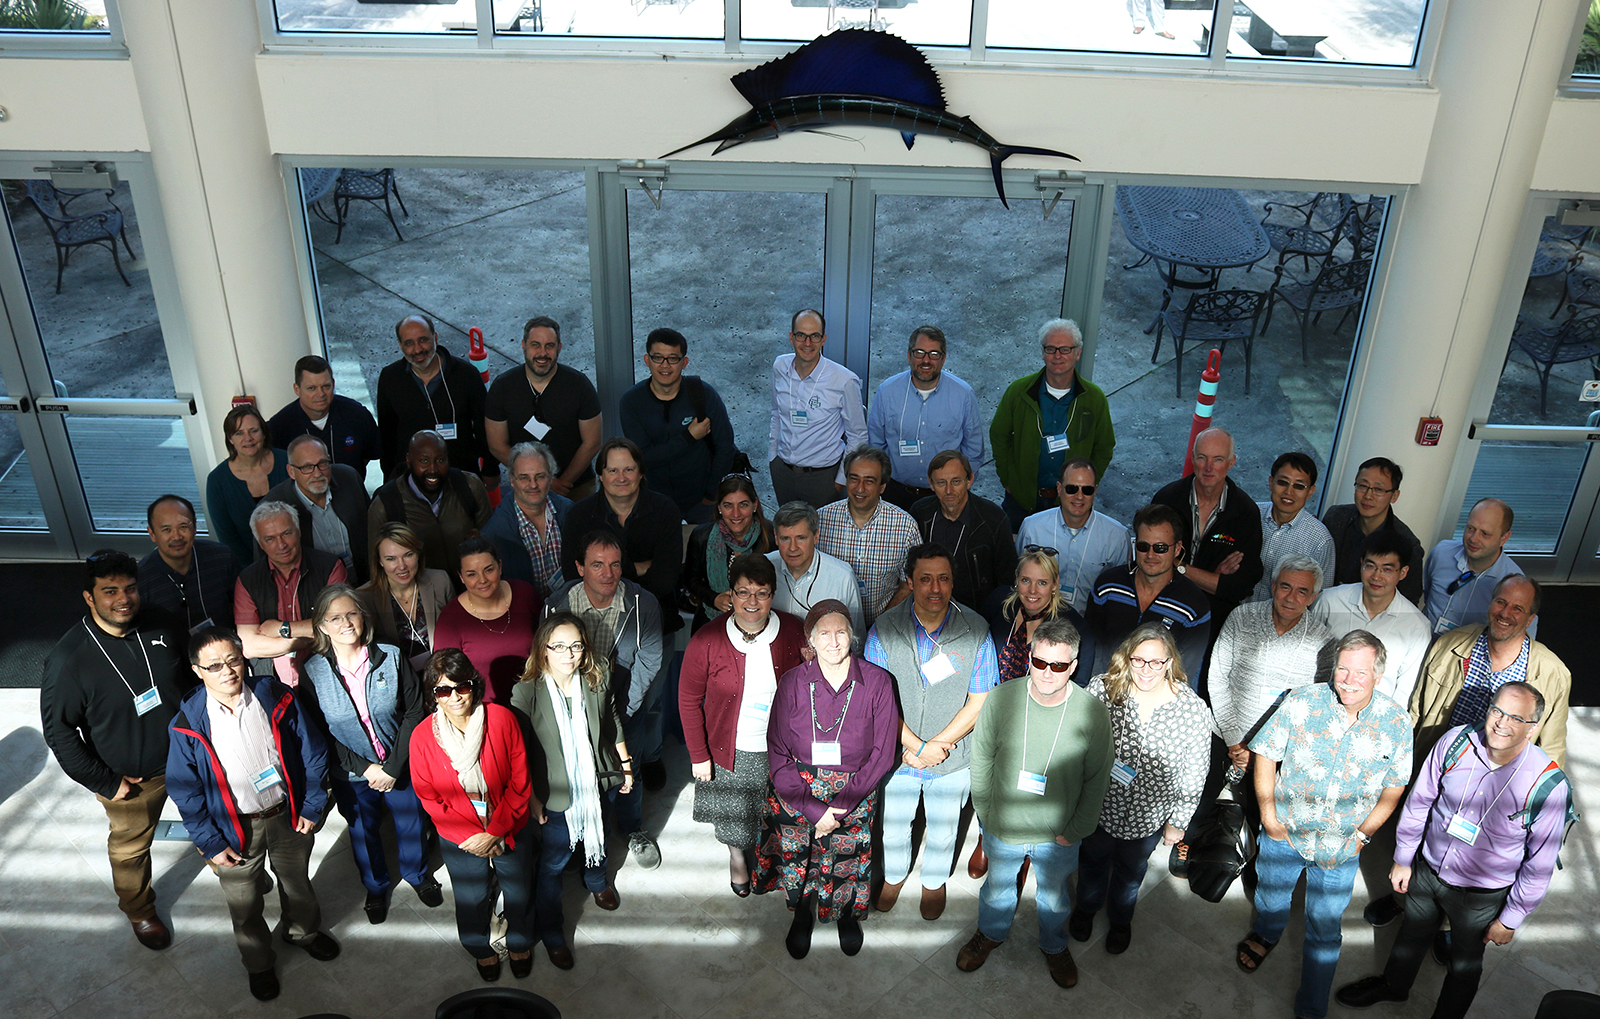 Members of the PACE Science Team pose for a photo at the 2018 Science Team Meeting, held at the Harbor Branch Oceanographic Institute in Fort Pierce, FL.